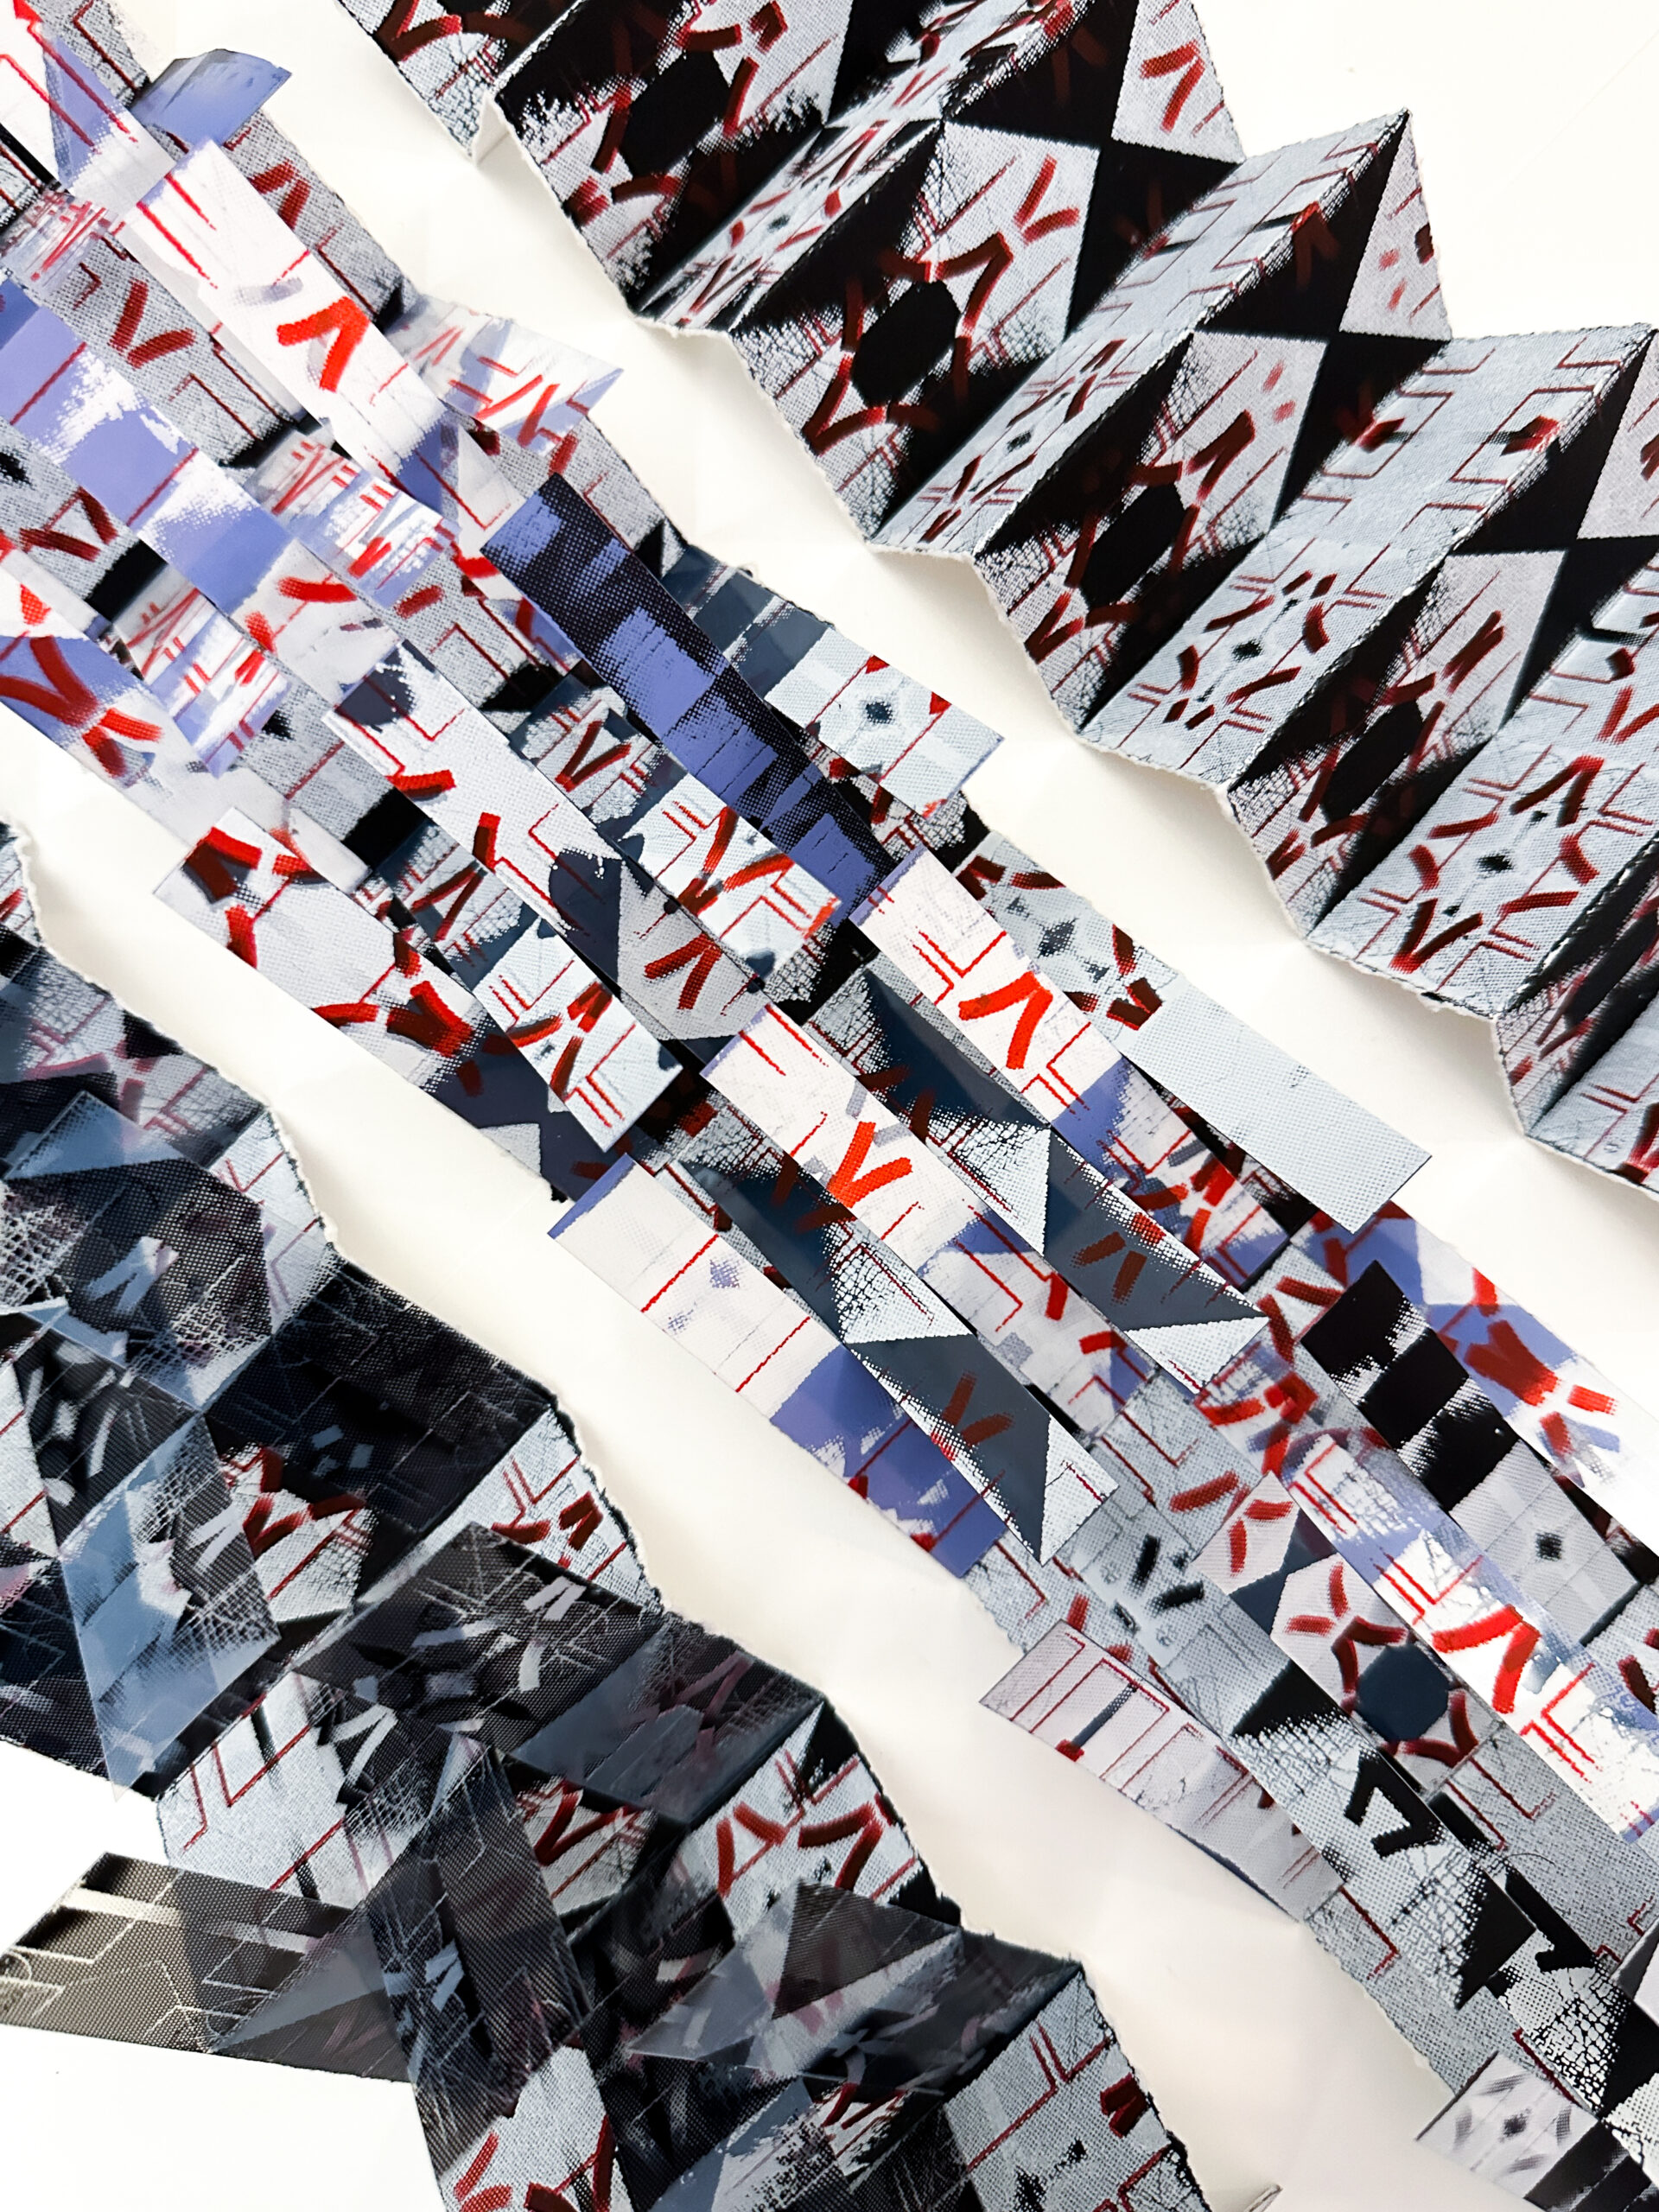 Photo of Jocelyn's artwork on a white background. The artwork consists of strips of paper with patterns in black, red, and blue, and they are folded into accordion-shaped structures. 